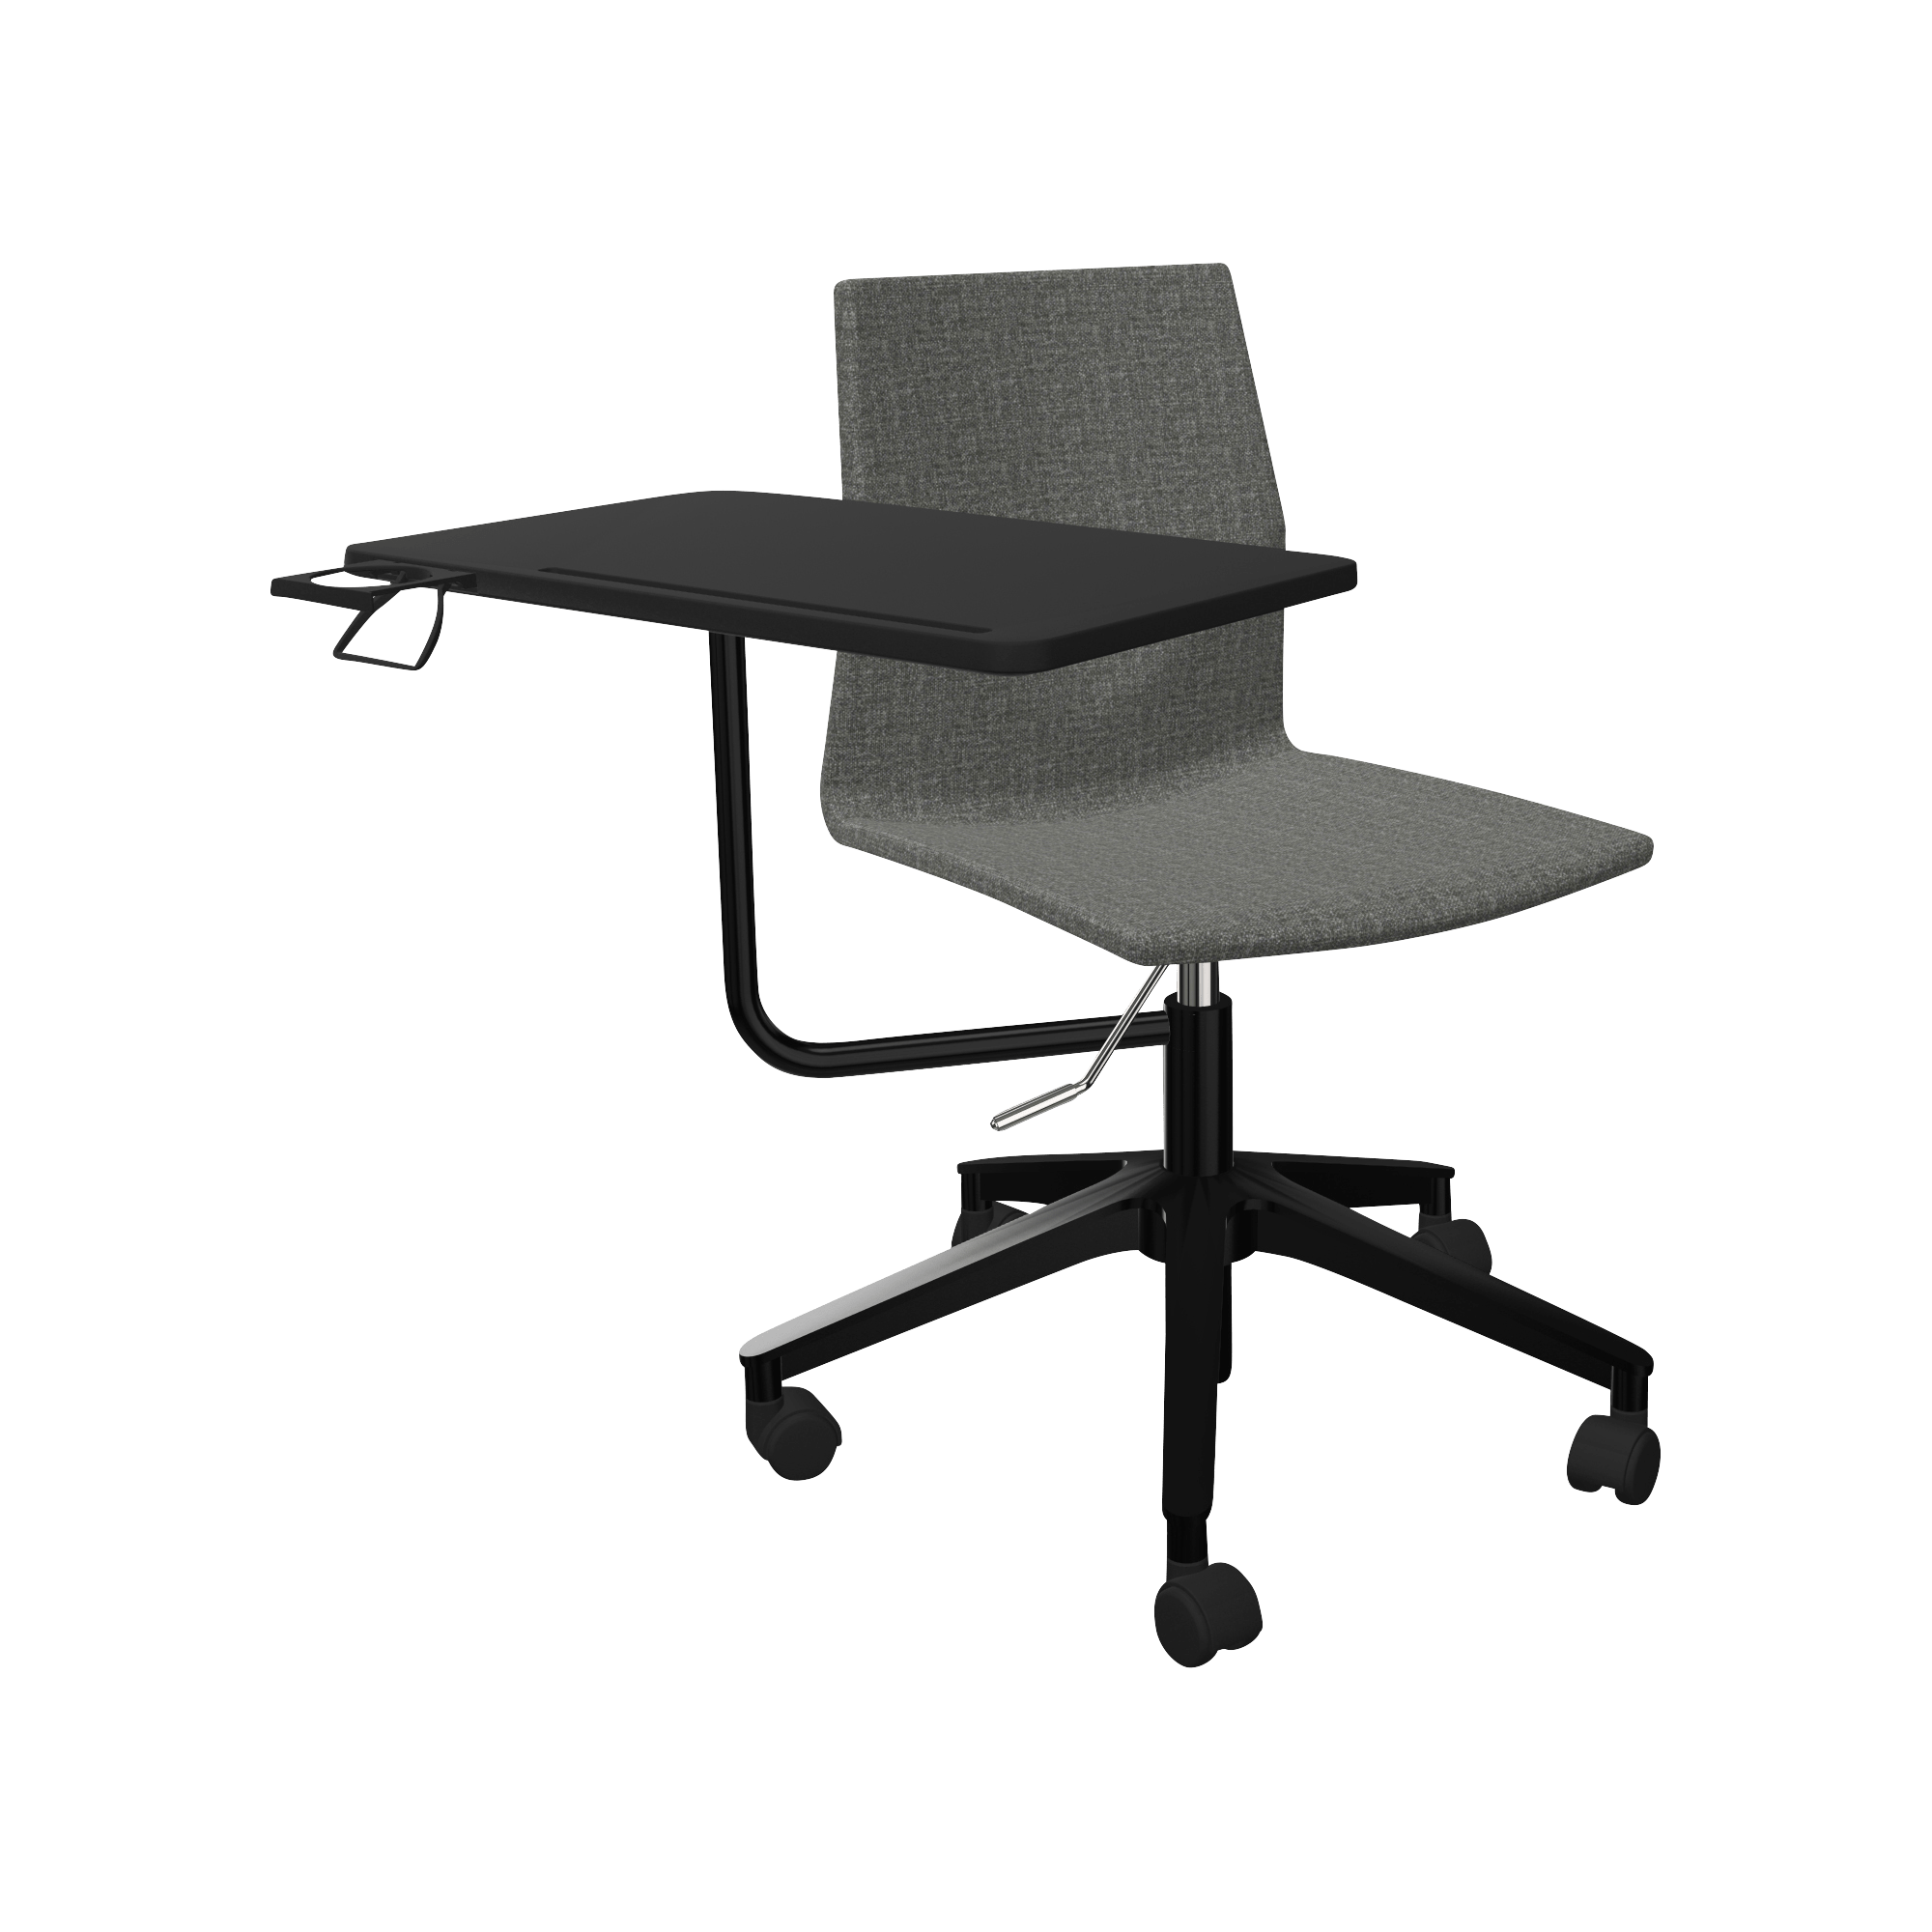 A black and gray office chair with a table.